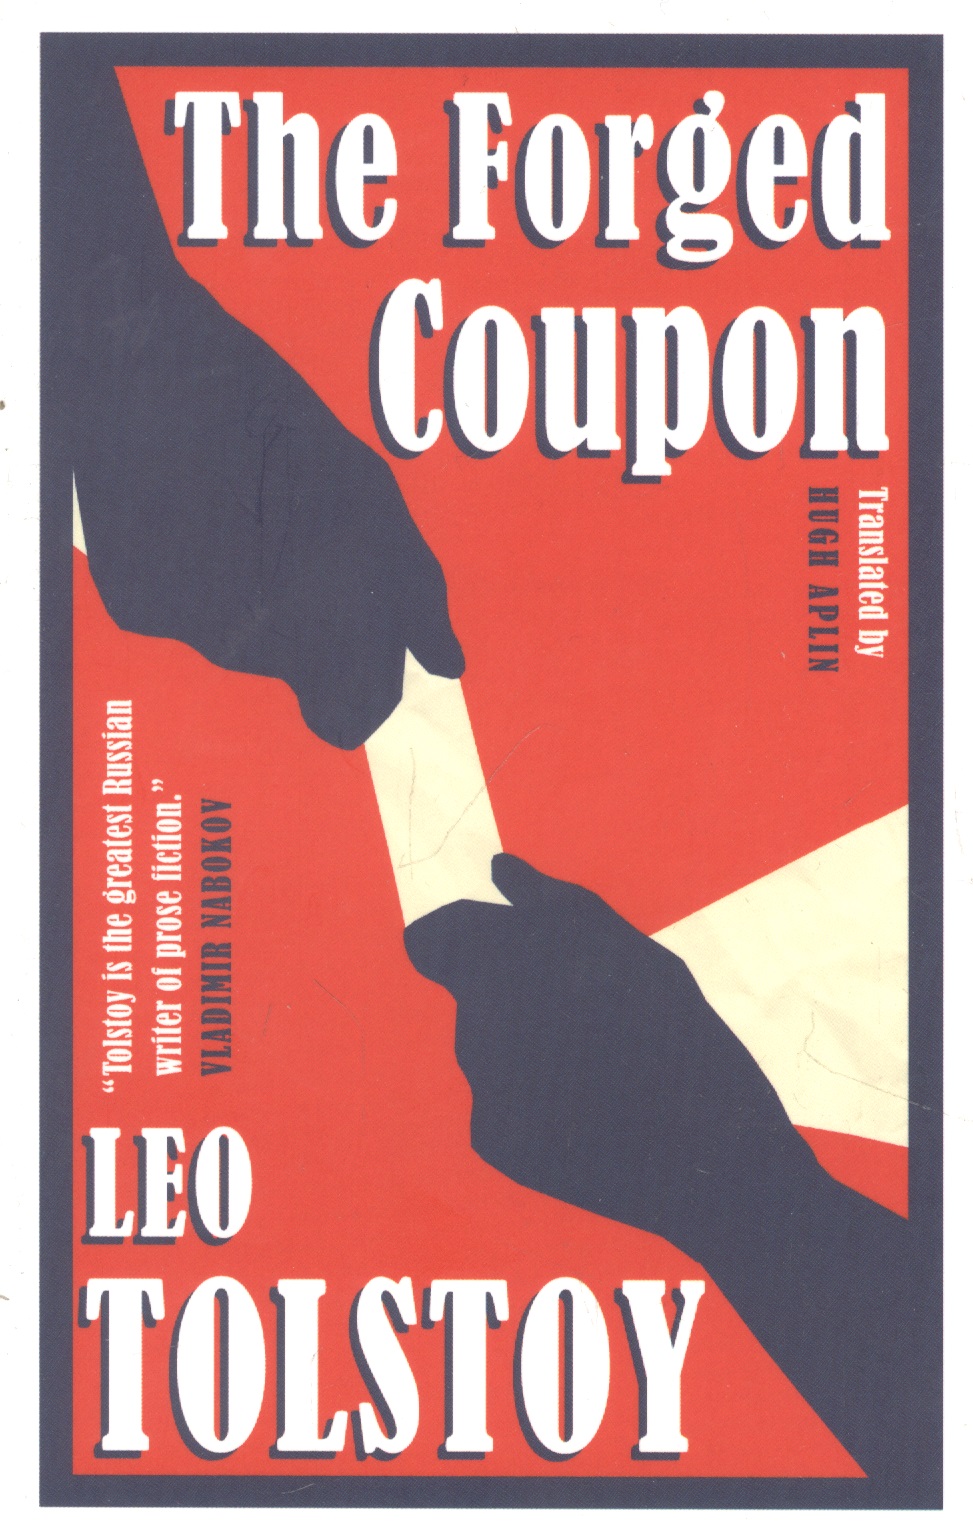 Forged Coupon tolstoy leo forged coupon